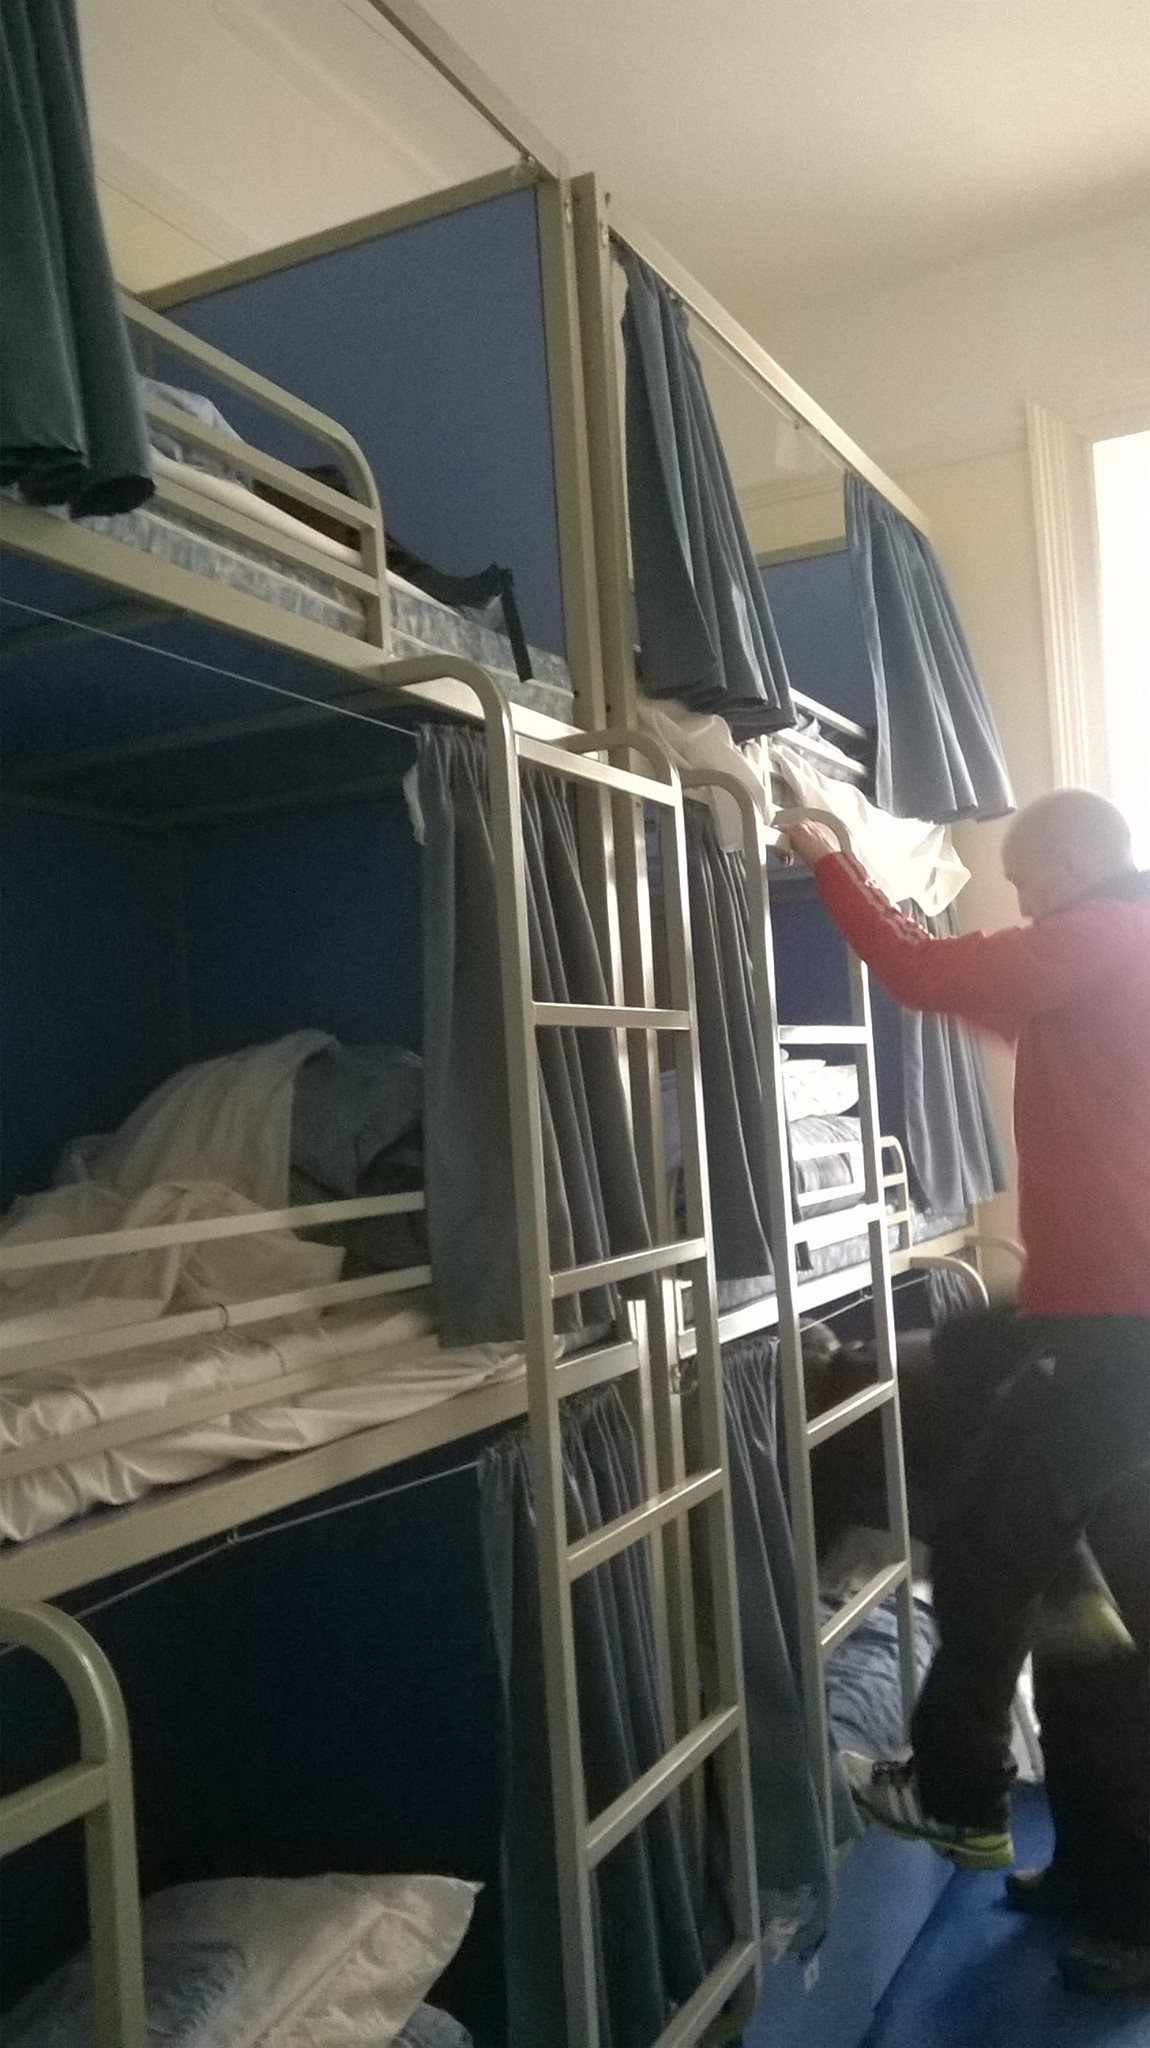 DD inspects his top bunk in the hostel dorm. 